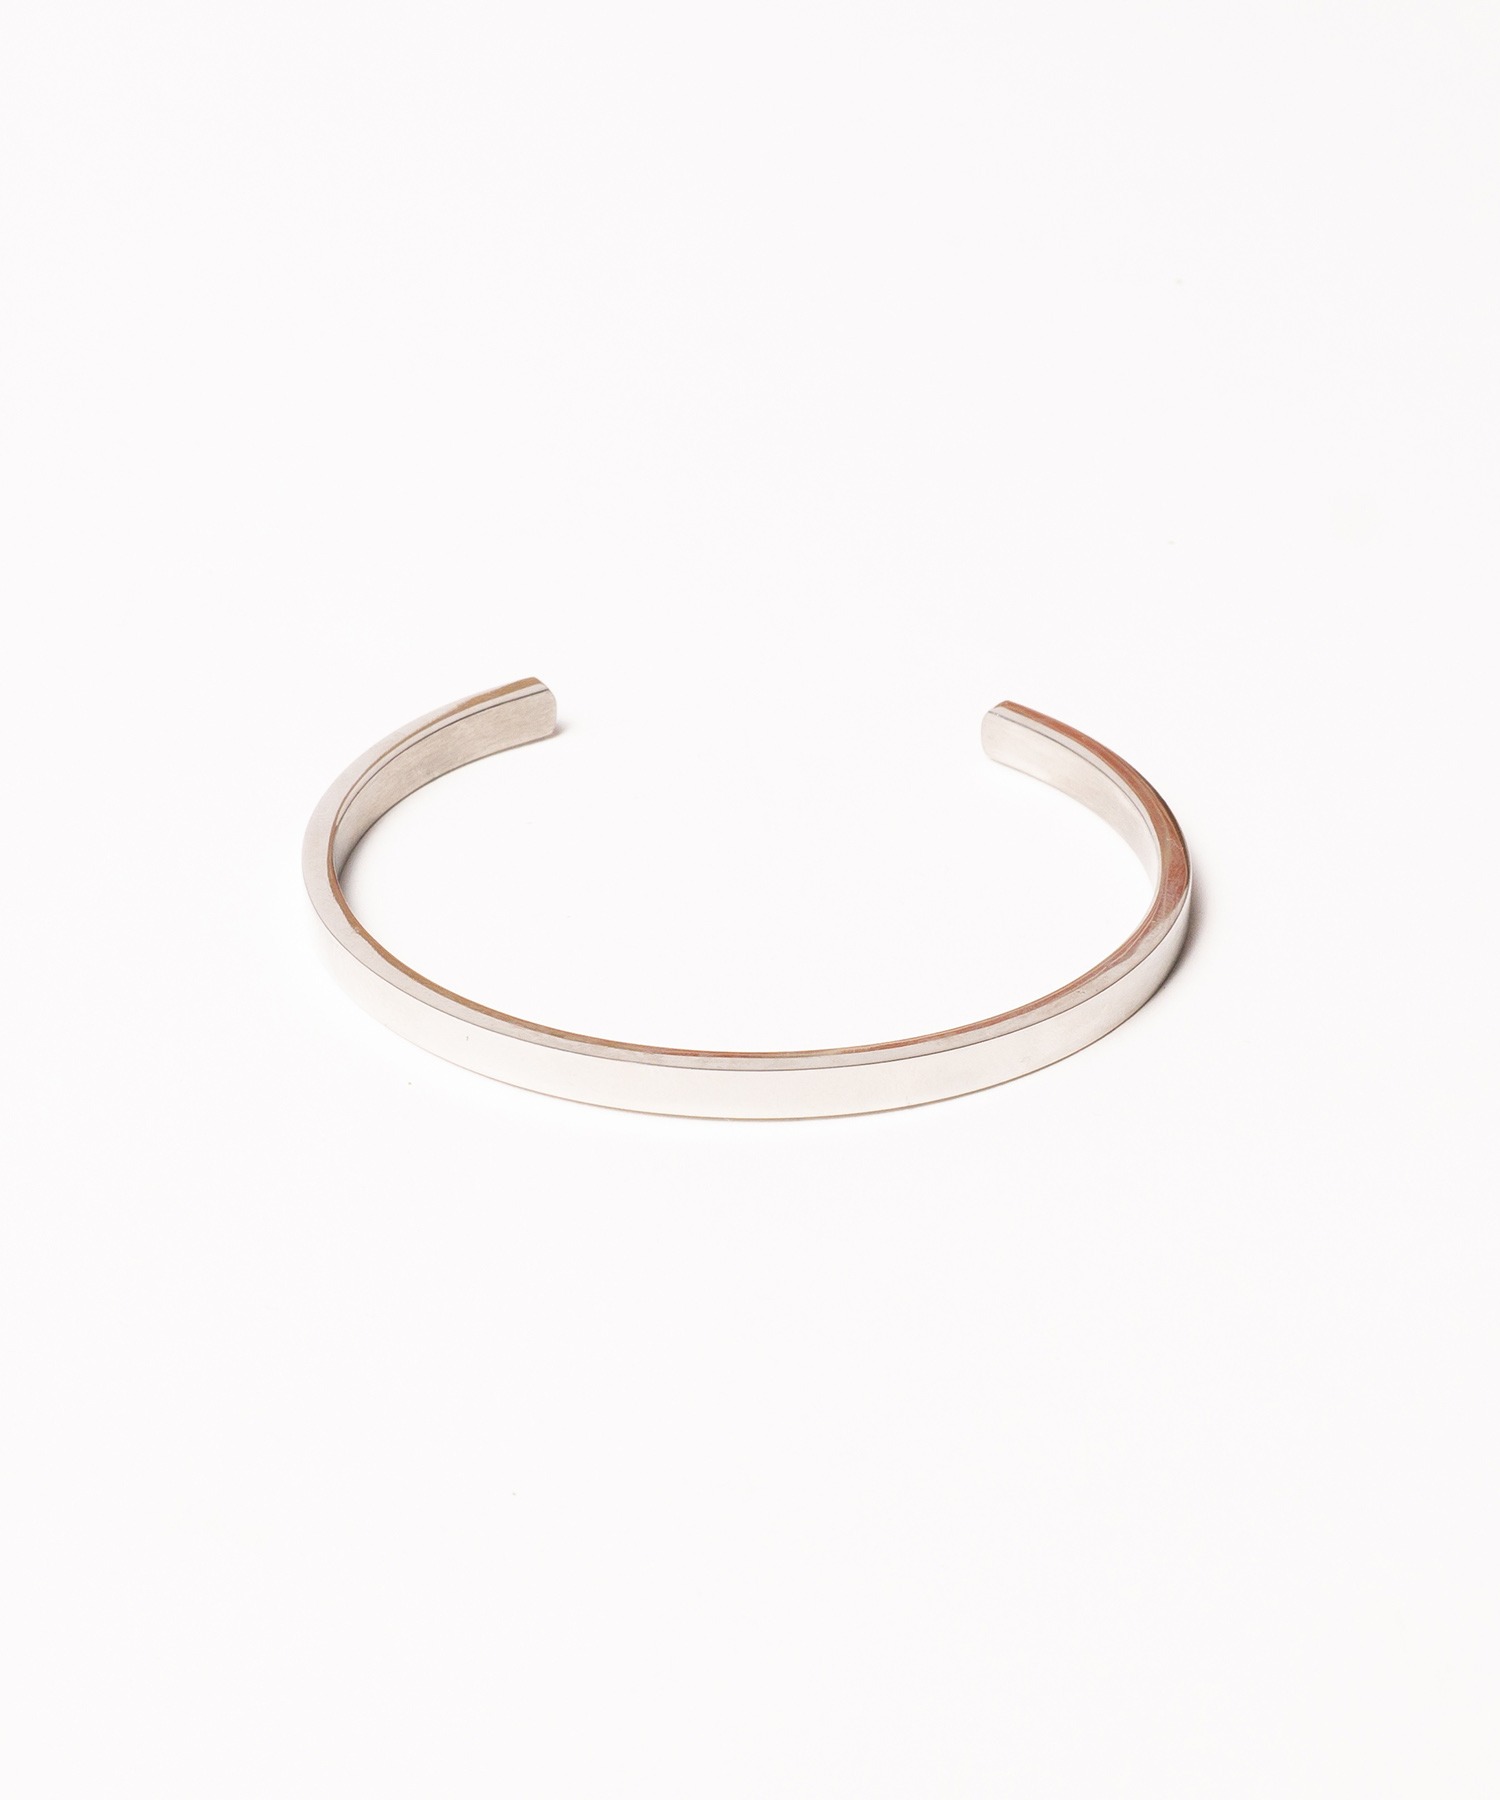 AntheAnthe by 爆安プライス 正規品販売 yarka plane stainless bangle